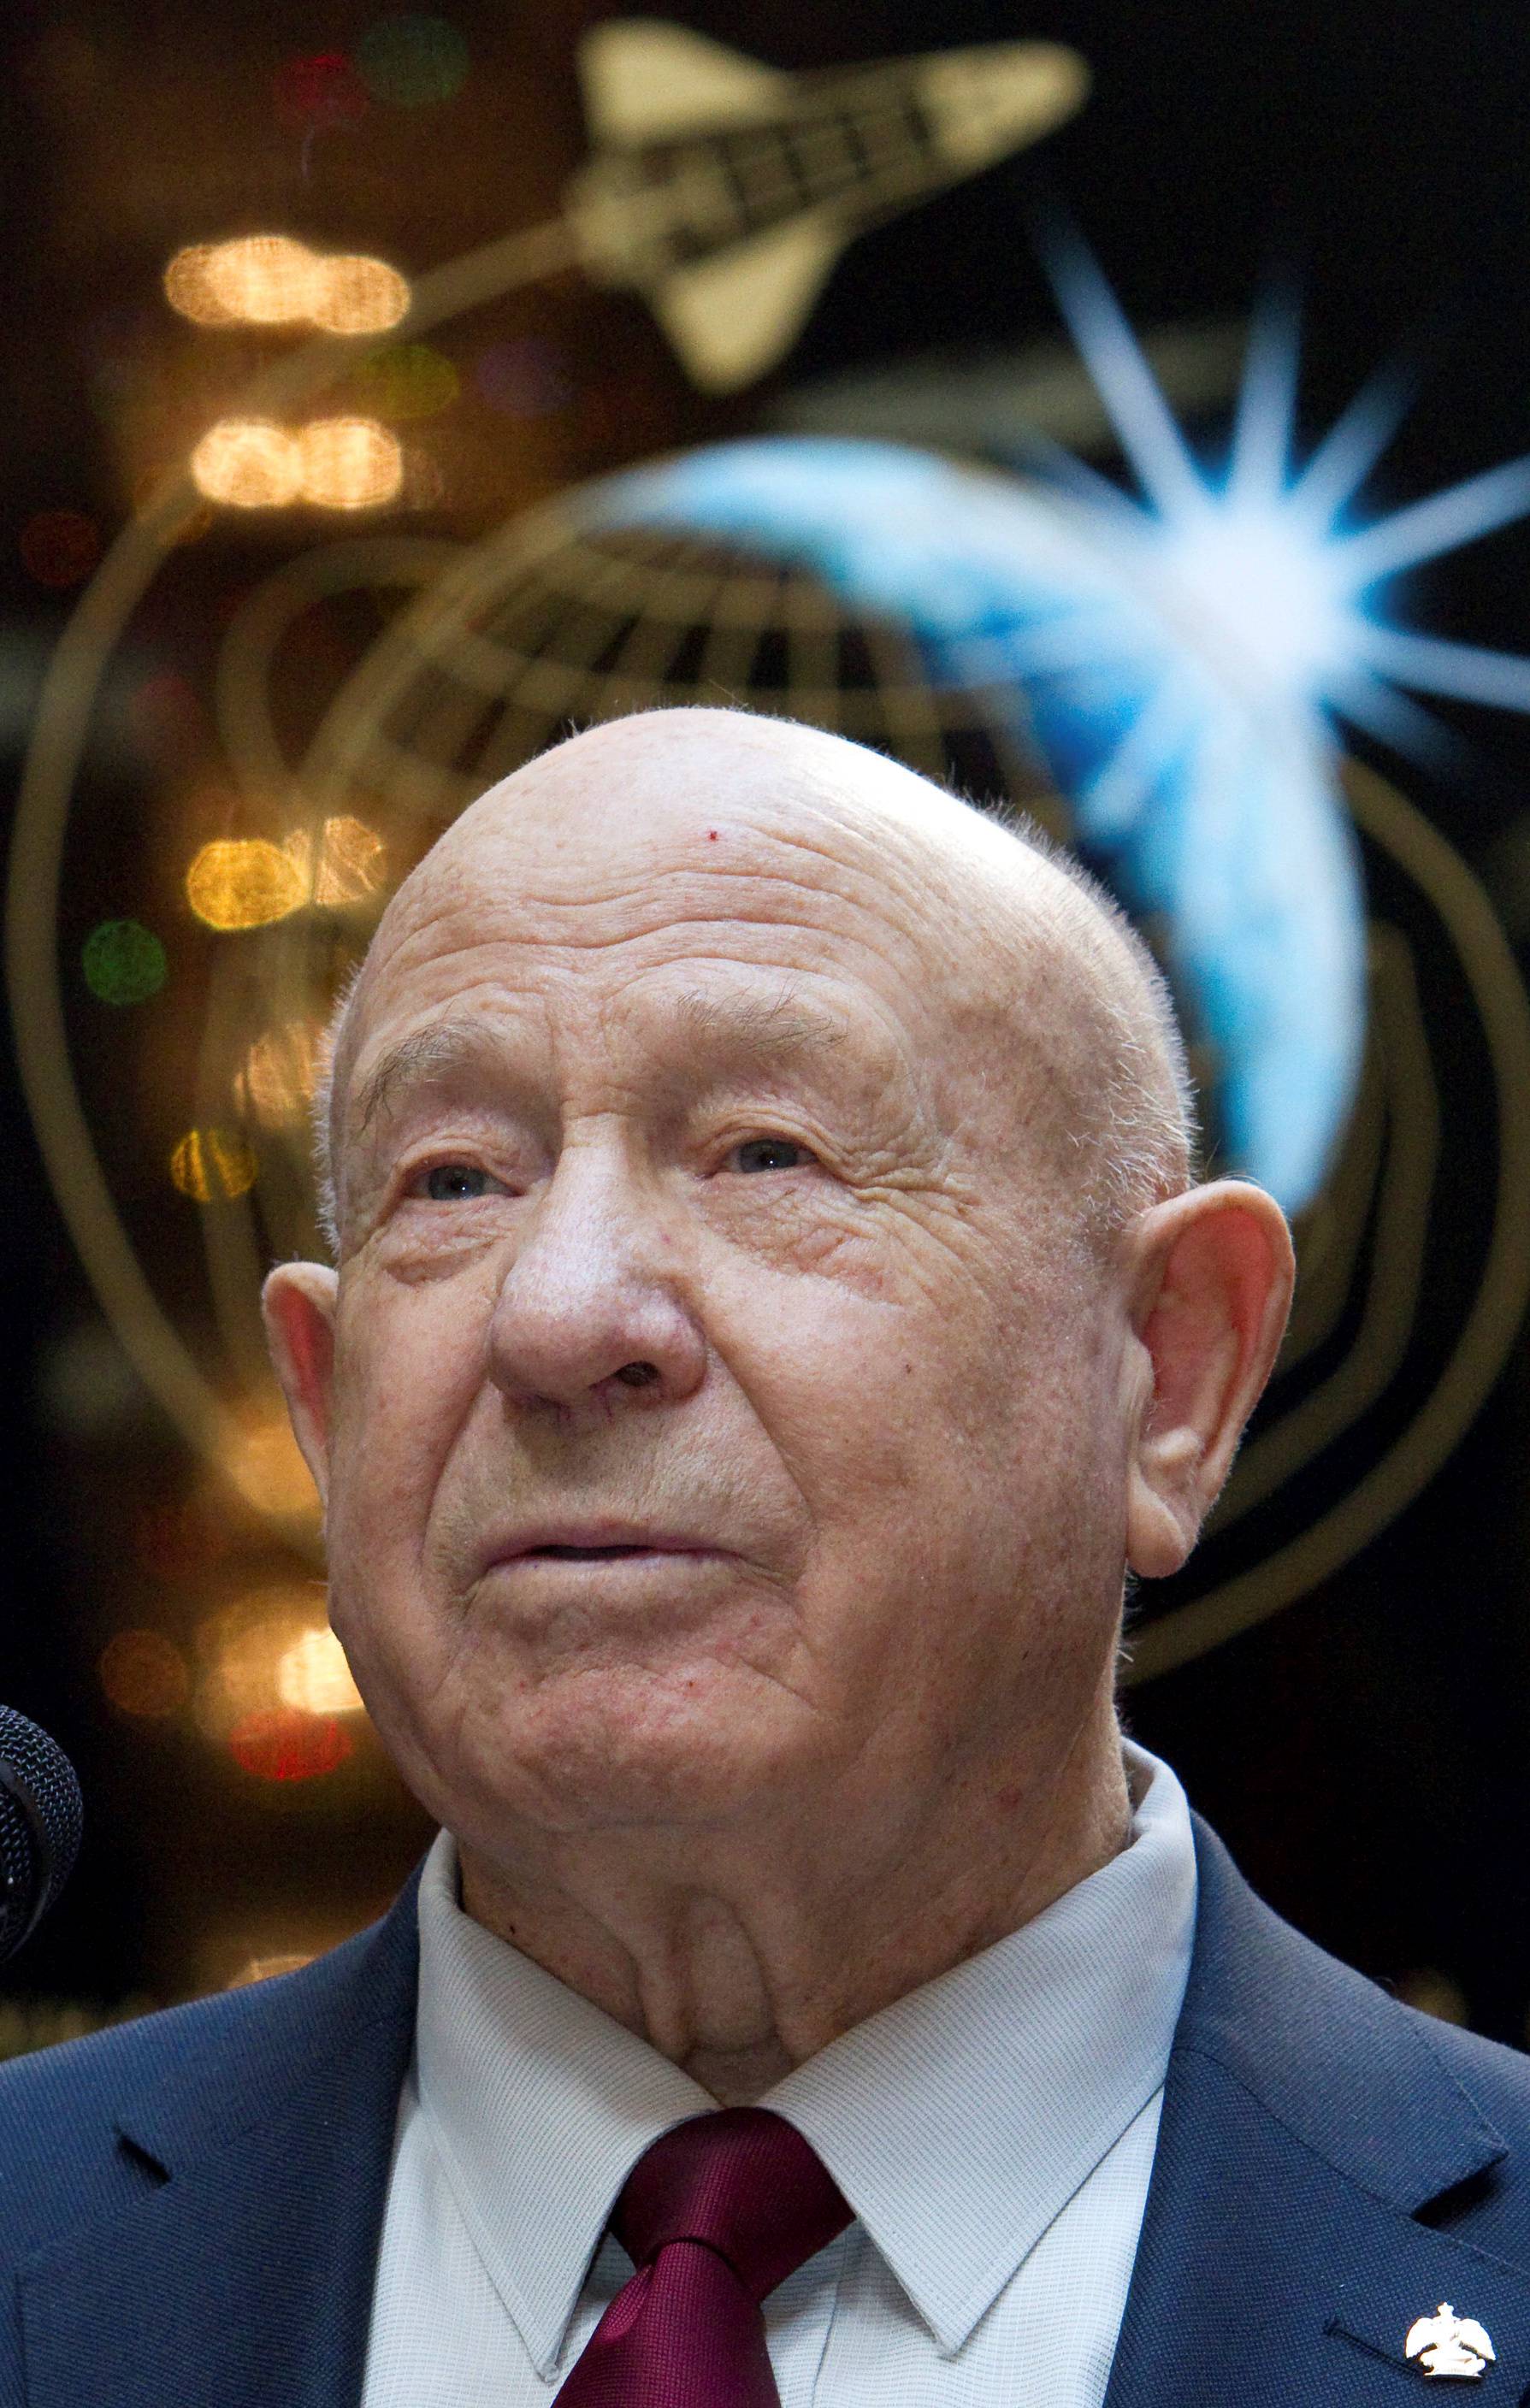 FILE PHOTO: Leonov, the first man to conduct a space walk in 1965, attends a photo exhibition in Moscow